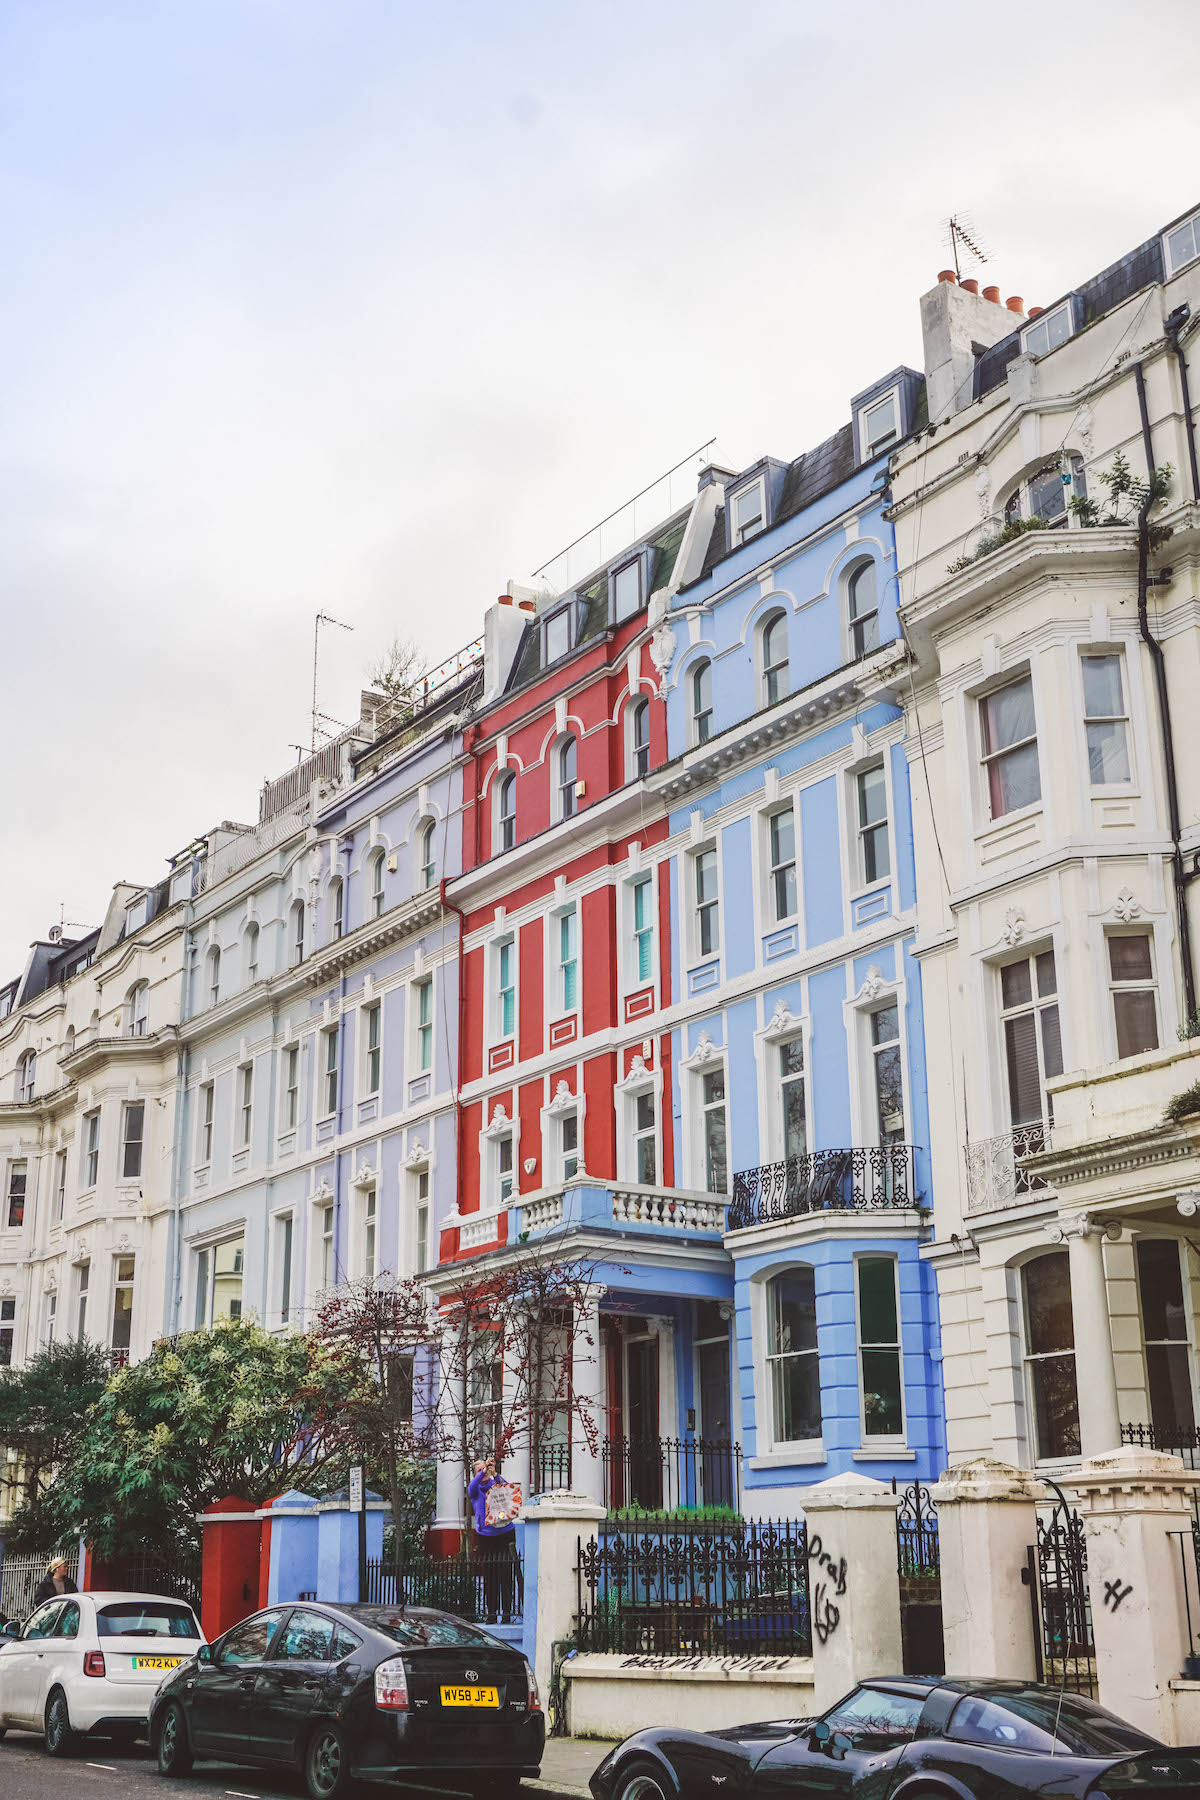 Colorful row houses in Notting Hill